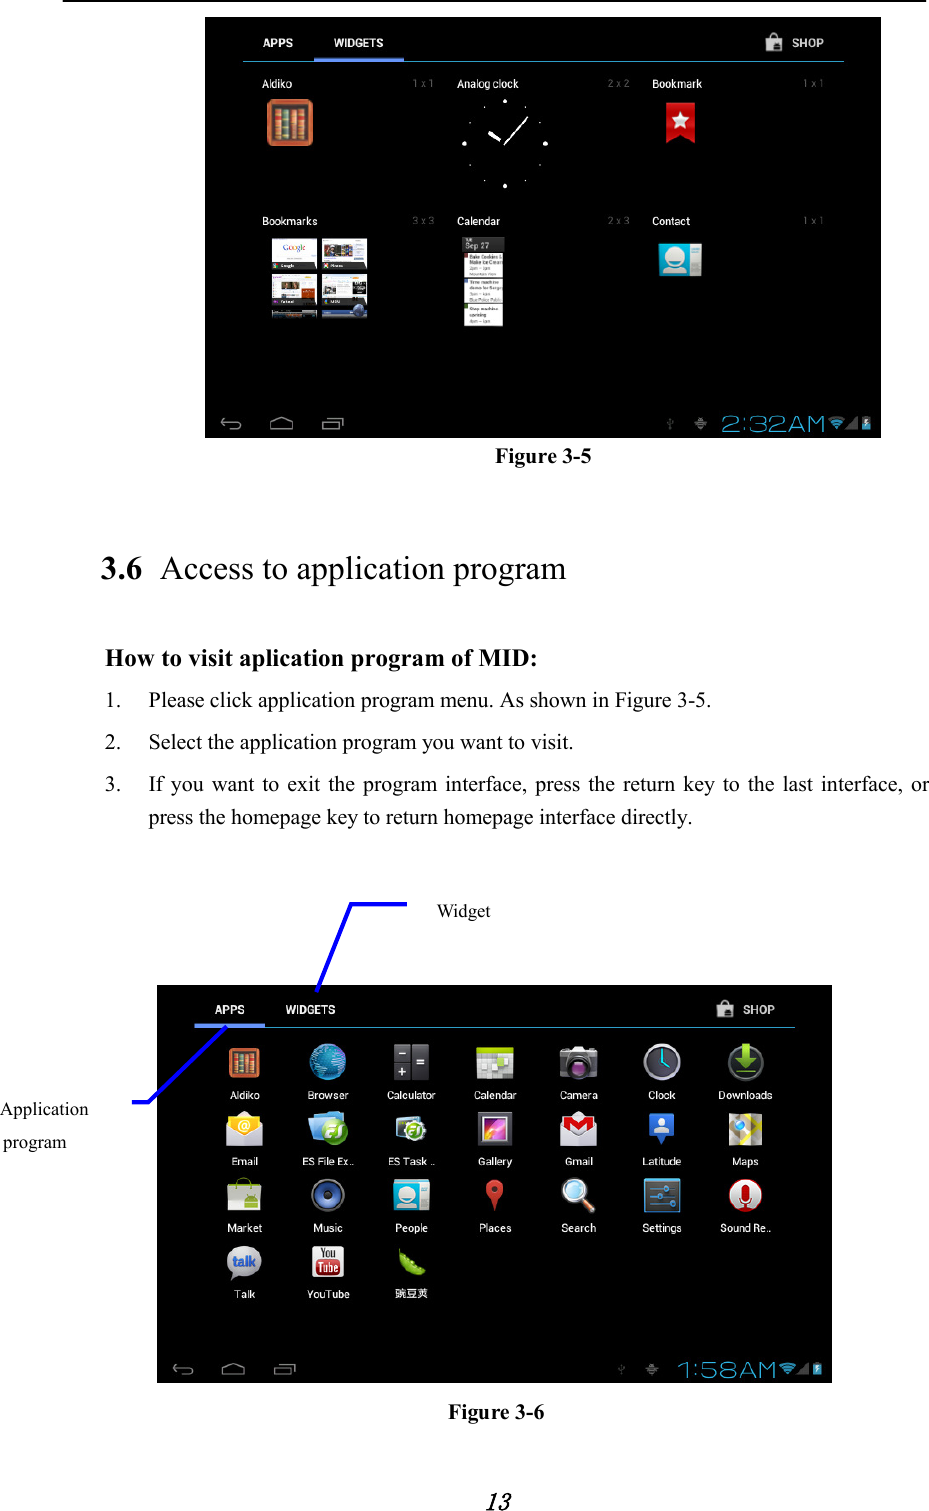            13                                      Figure 3-5 3.6 Access to application program How to visit aplication program of MID: 1. Please click application program menu. As shown in Figure 3-5. 2. Select the application program you want to visit. 3. If you want to exit the program interface, press the return key to the last interface, or press the homepage key to return homepage interface directly.      Figure 3-6 Application program Widget 